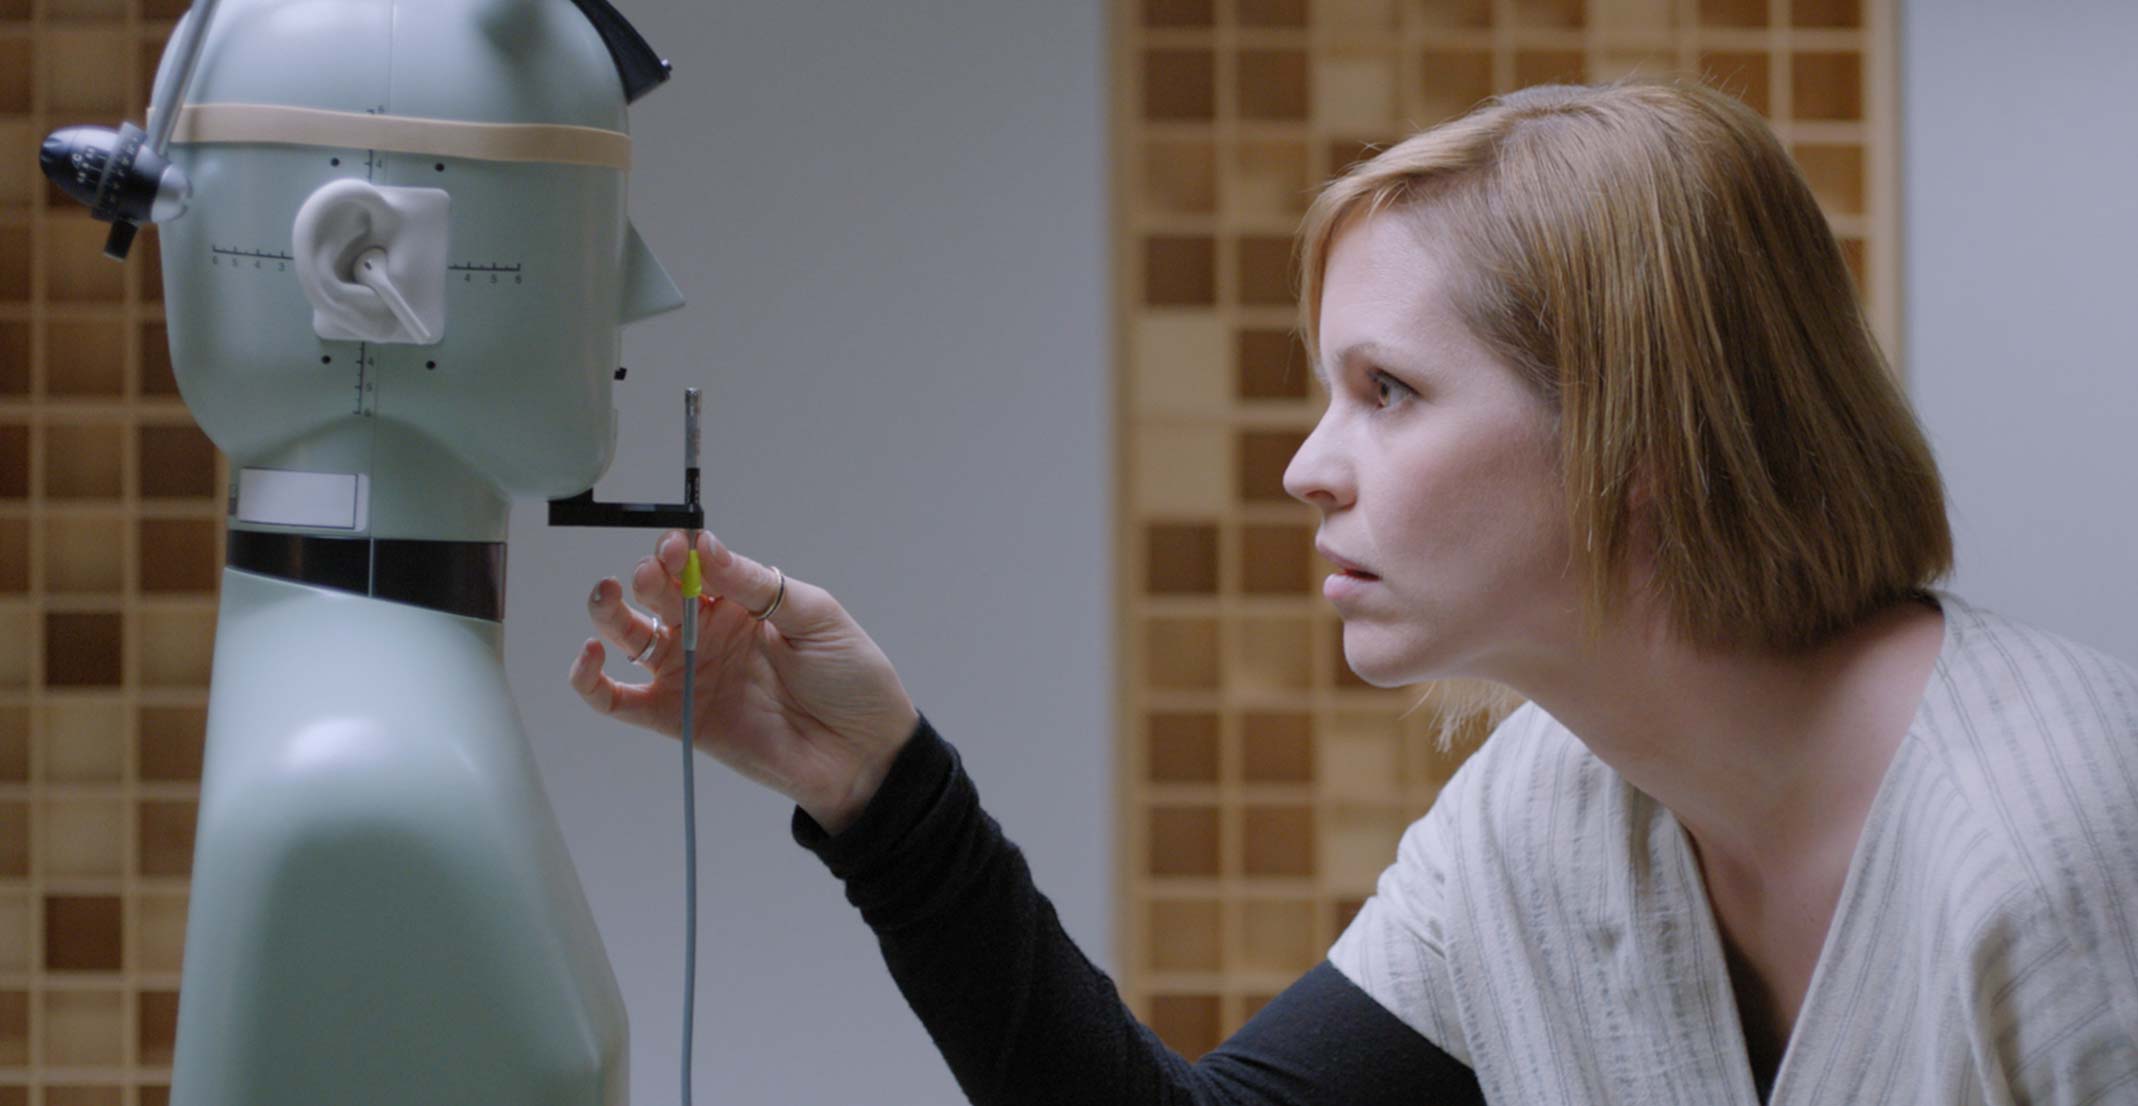 Suzie, a manager of an acoustic prototyping group at Apple, adjusts a microphone in front of a mannequin at an engineering lab in Cupertino.